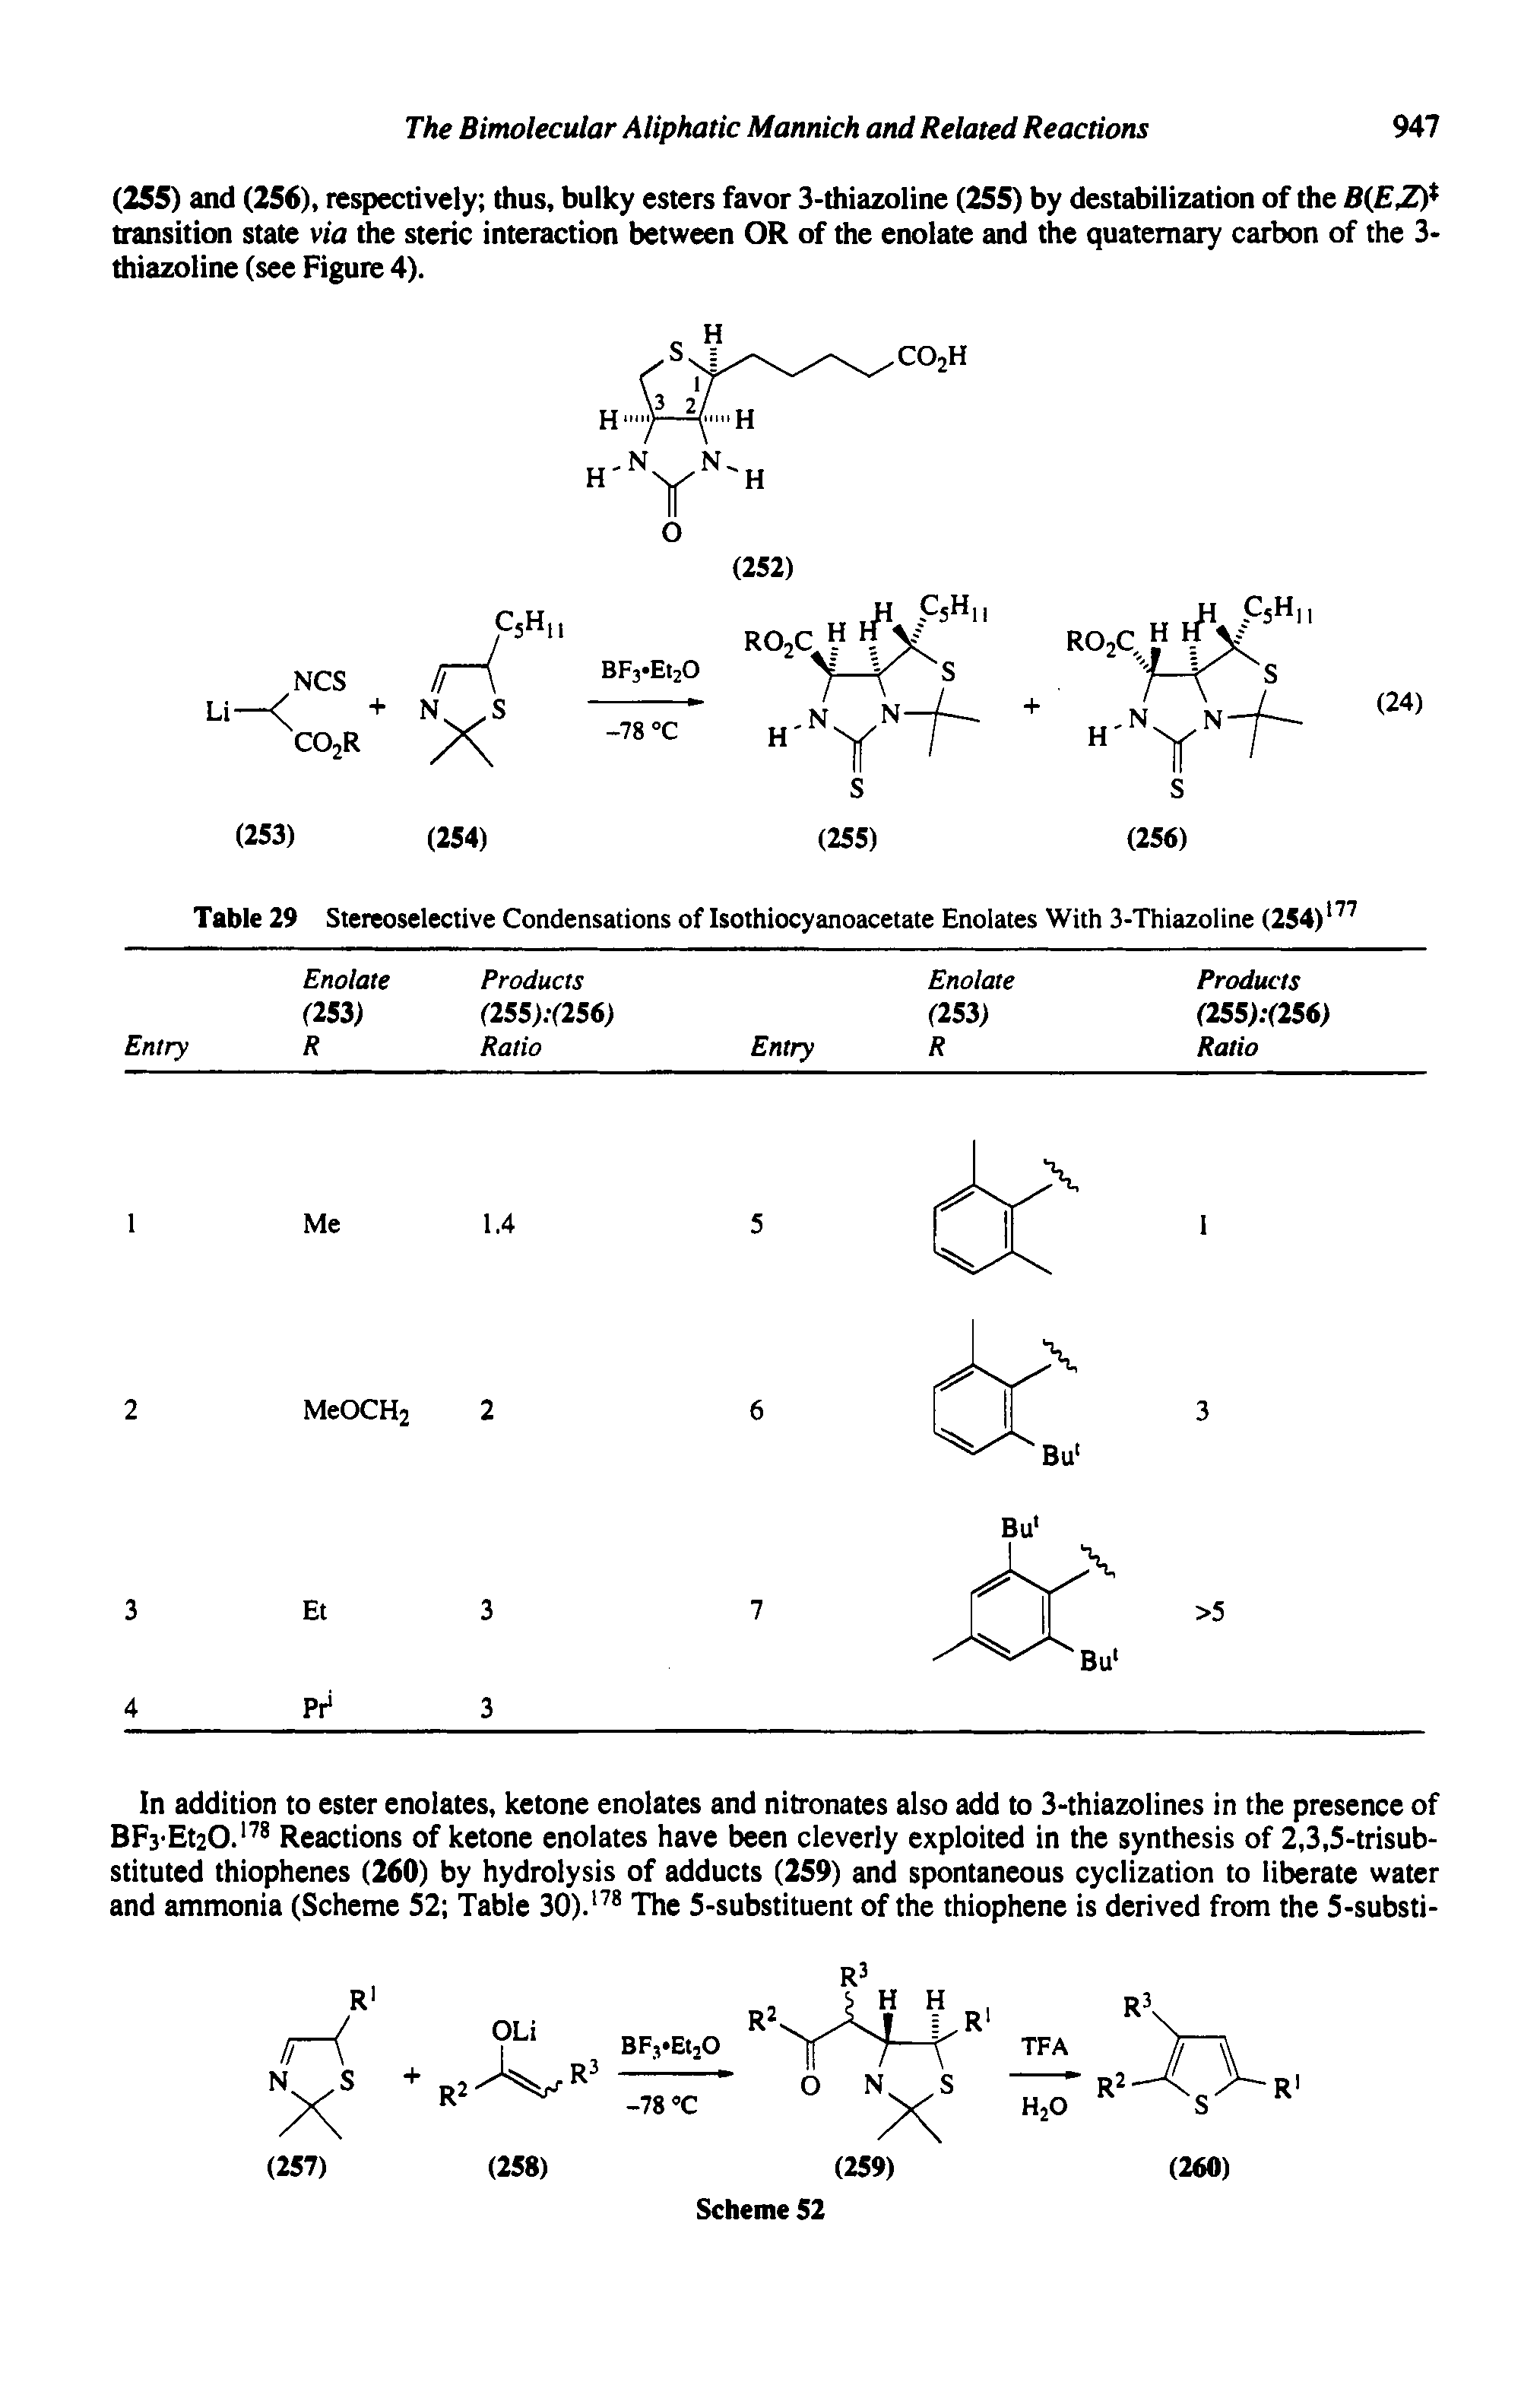 Table 29 Stereoselective Condensations of Isothiocyanoacetate Enolates With 3-Thiazoline (254) ...